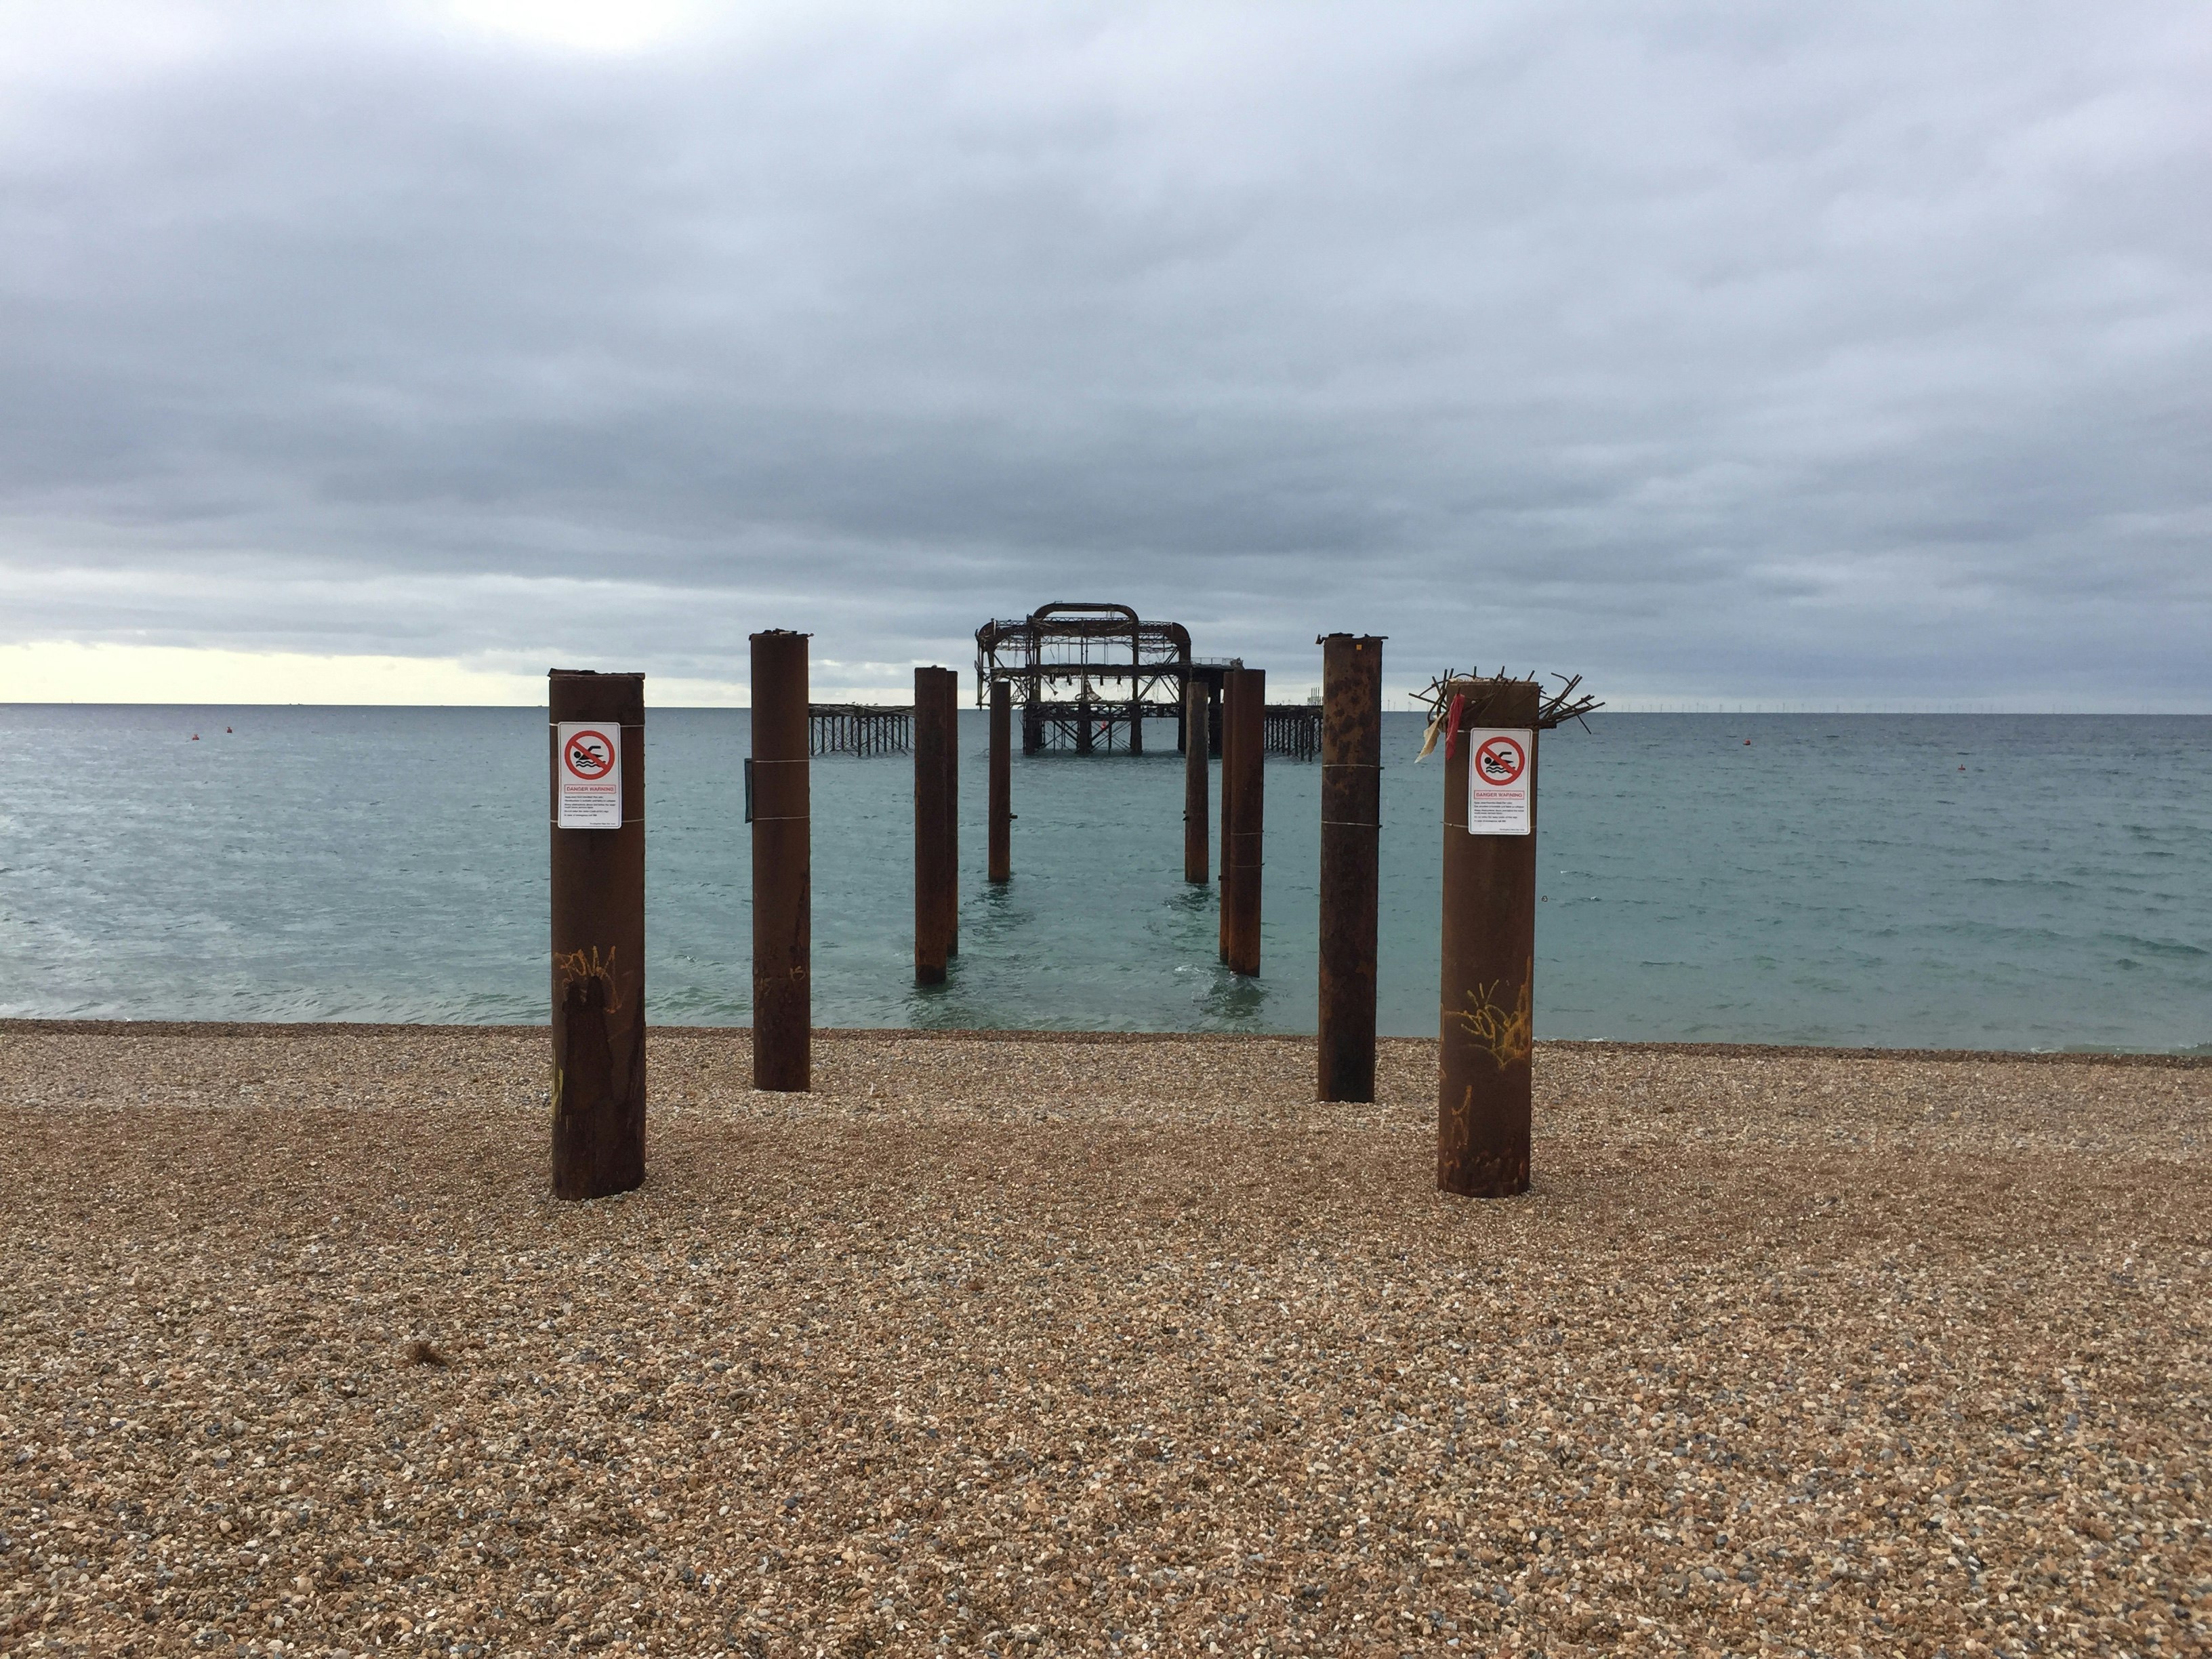 West pier - Picture taken by Laure